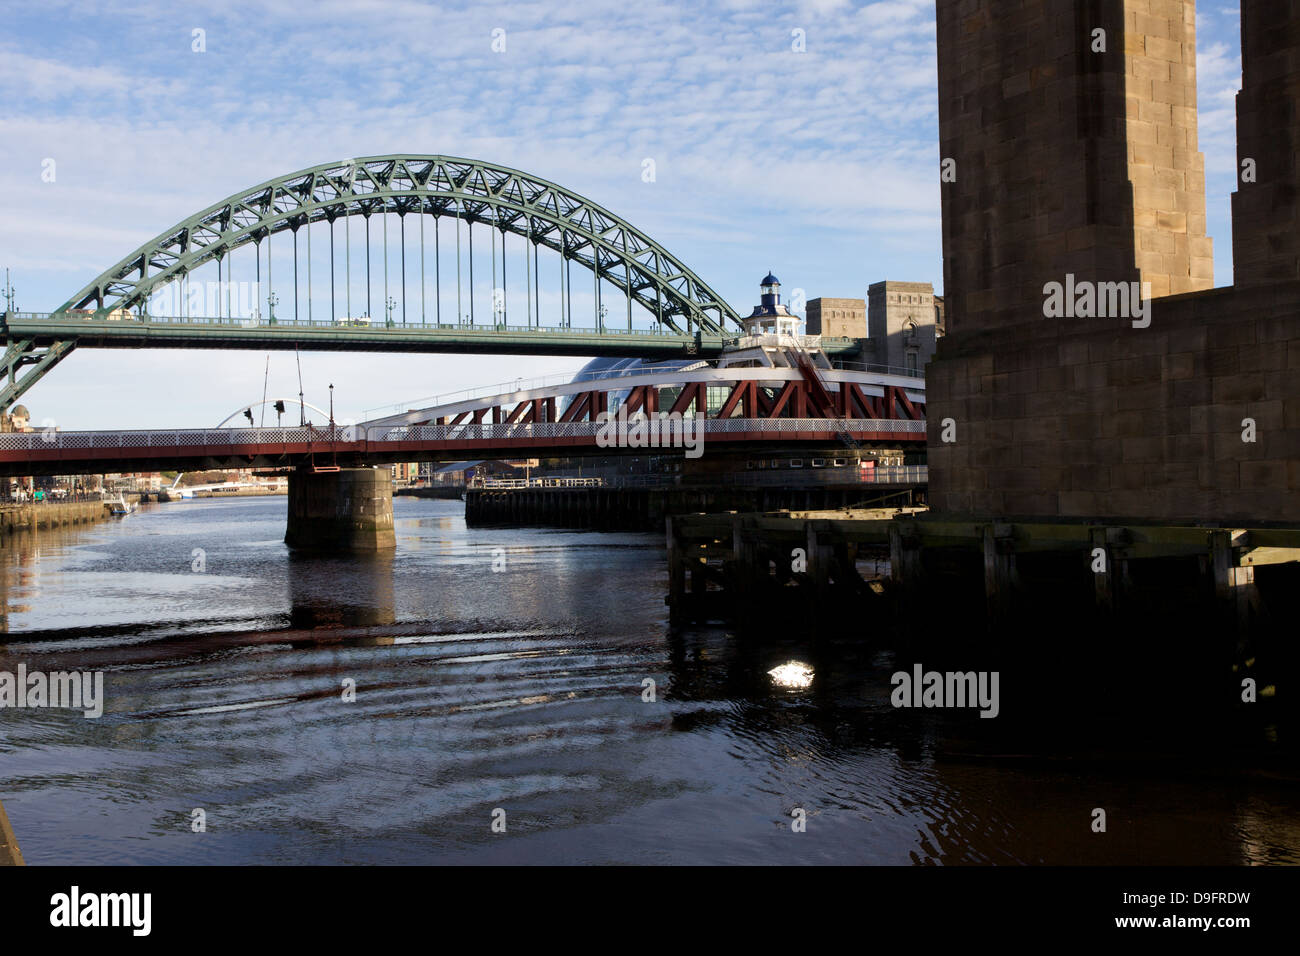 A view of the River Tyne which flows through Newcastle Upon Tyne showing the Low Level Bridge and the Tyne Bridge. Stock Photo